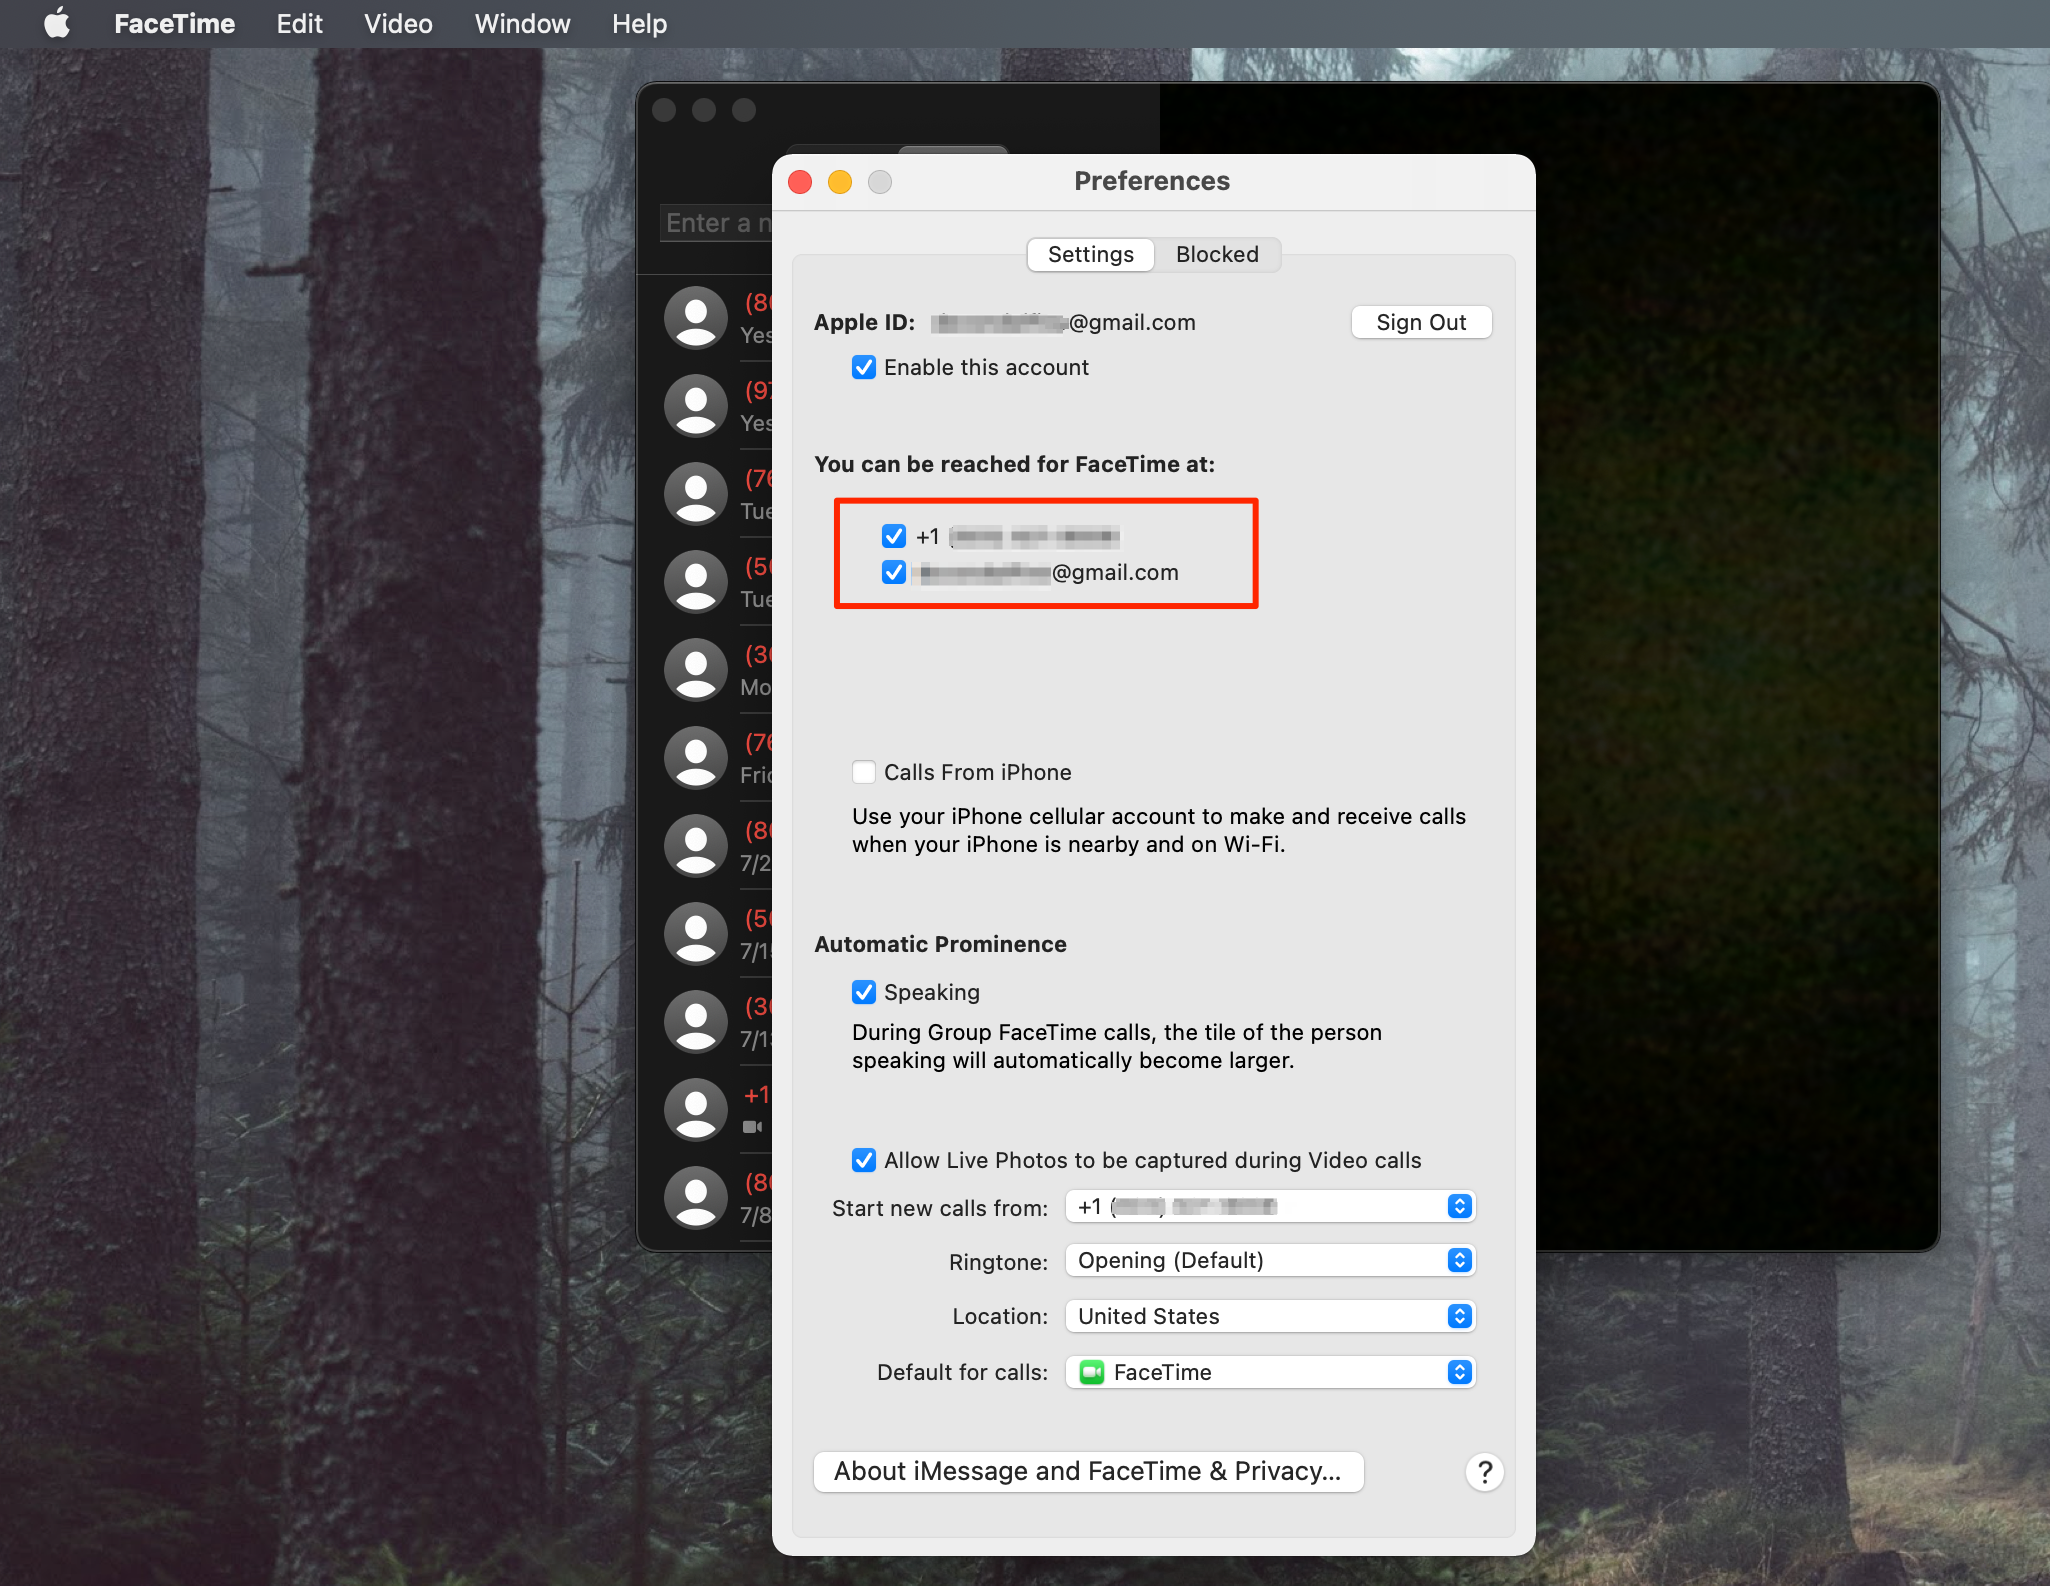 facetime not working: facetime preferences on mac